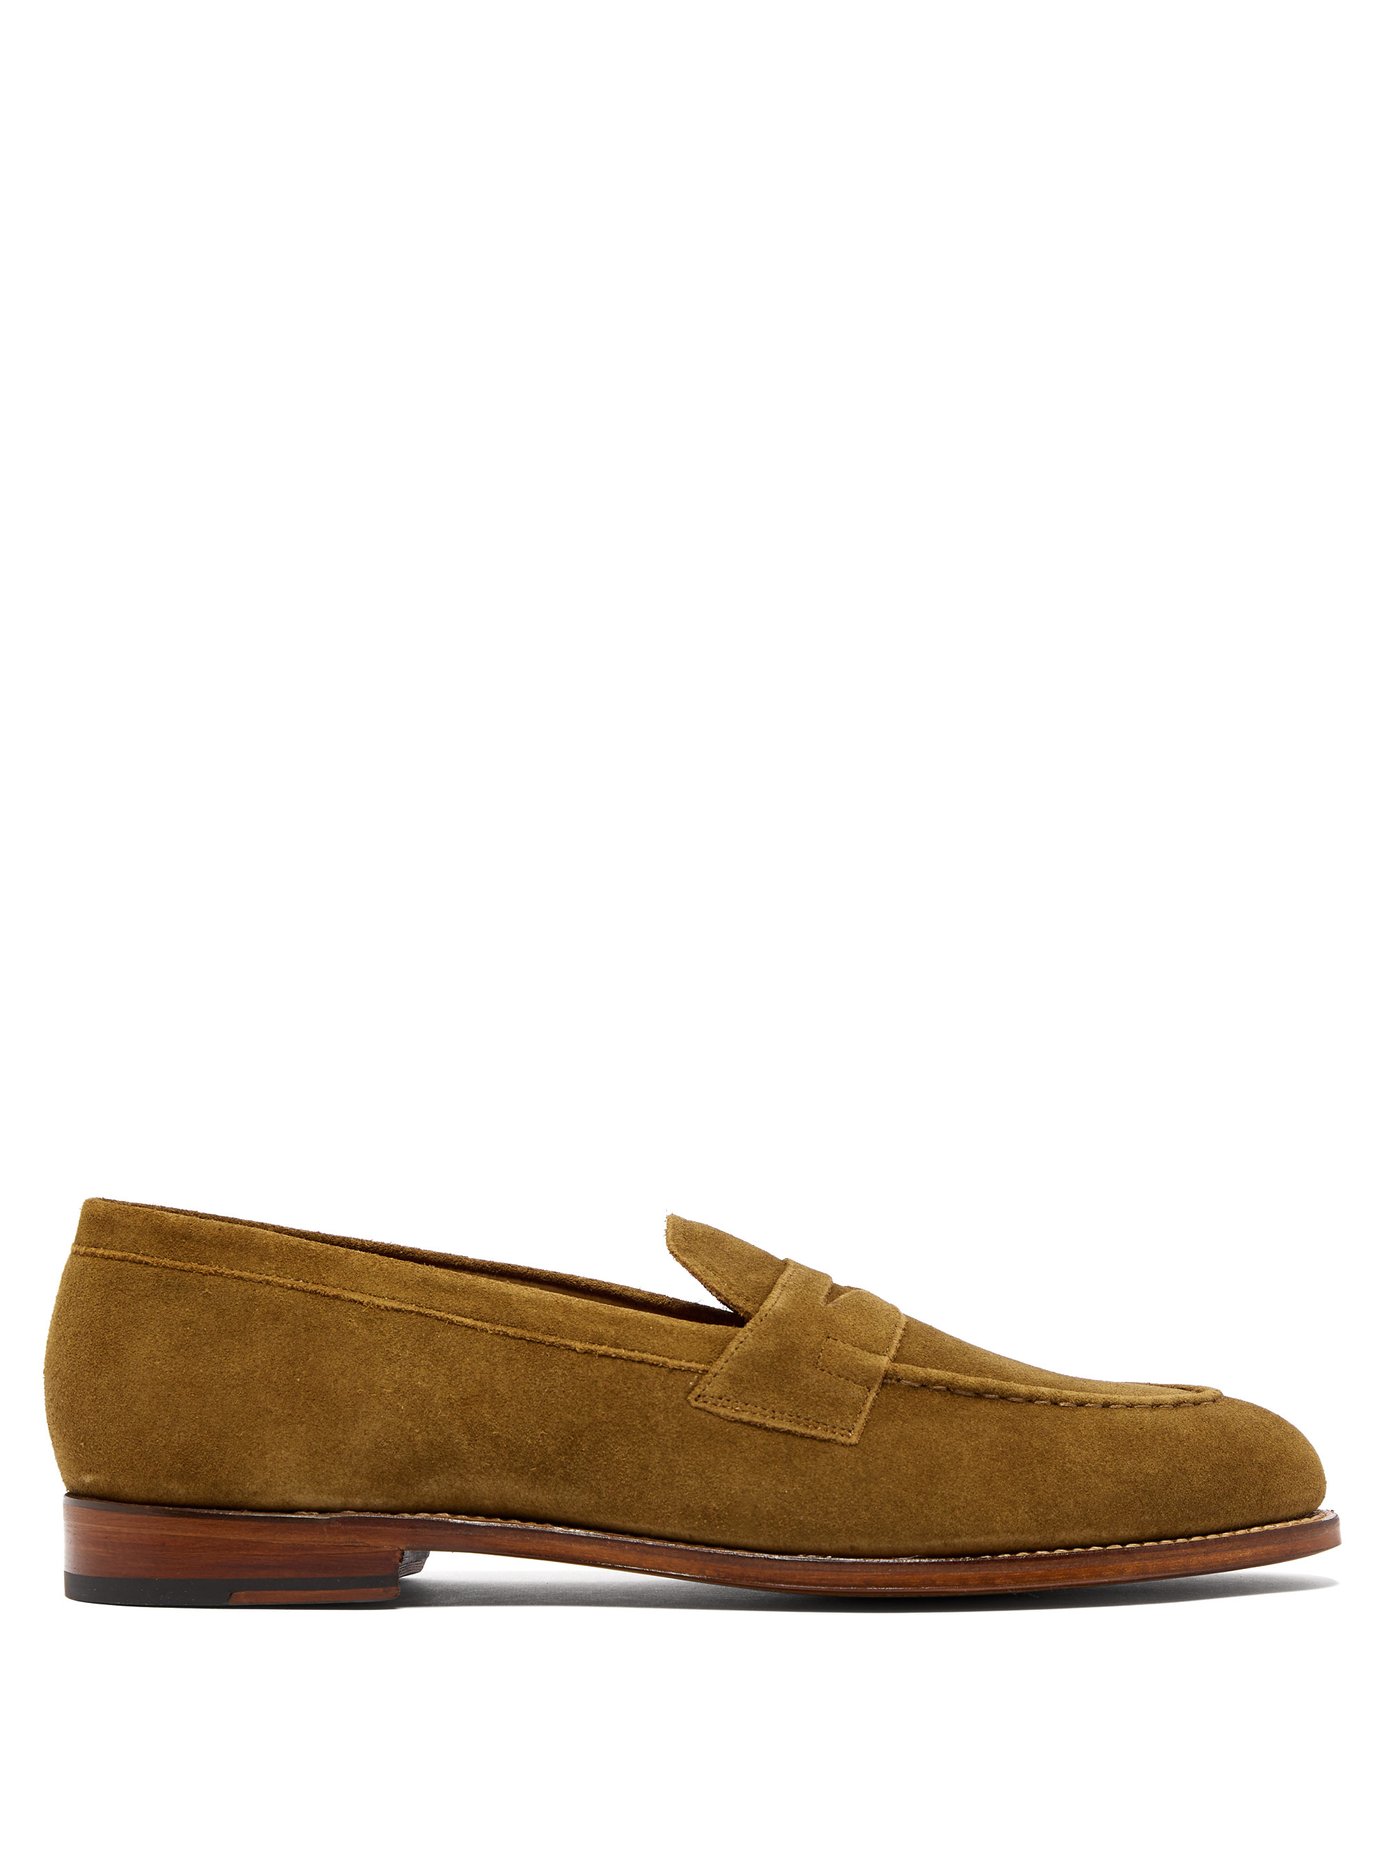 grenson moccasin shoes